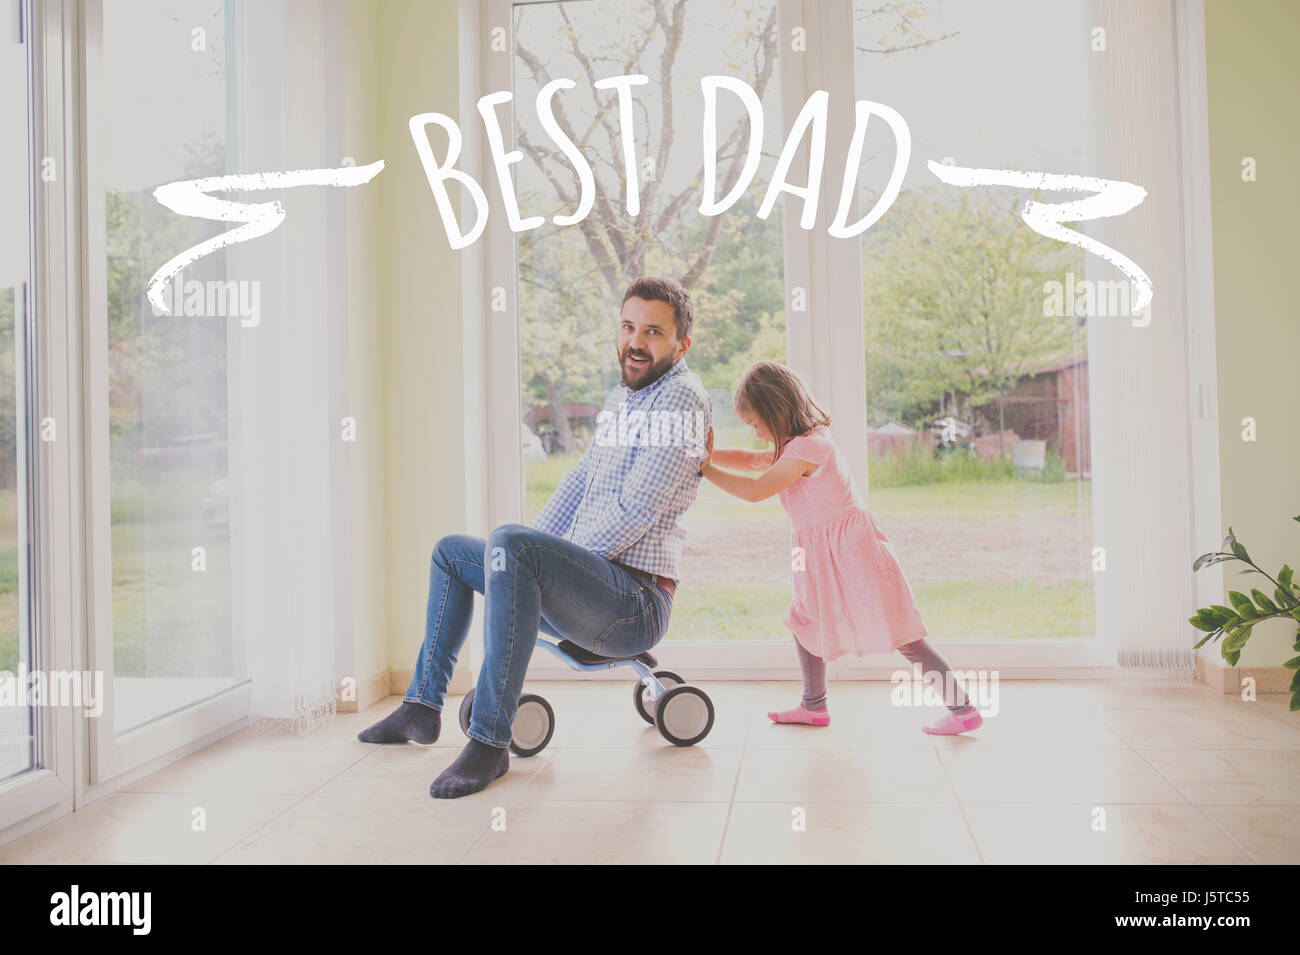 Father and daughter riding bike indoors. Fathers day concept. Stock Photo